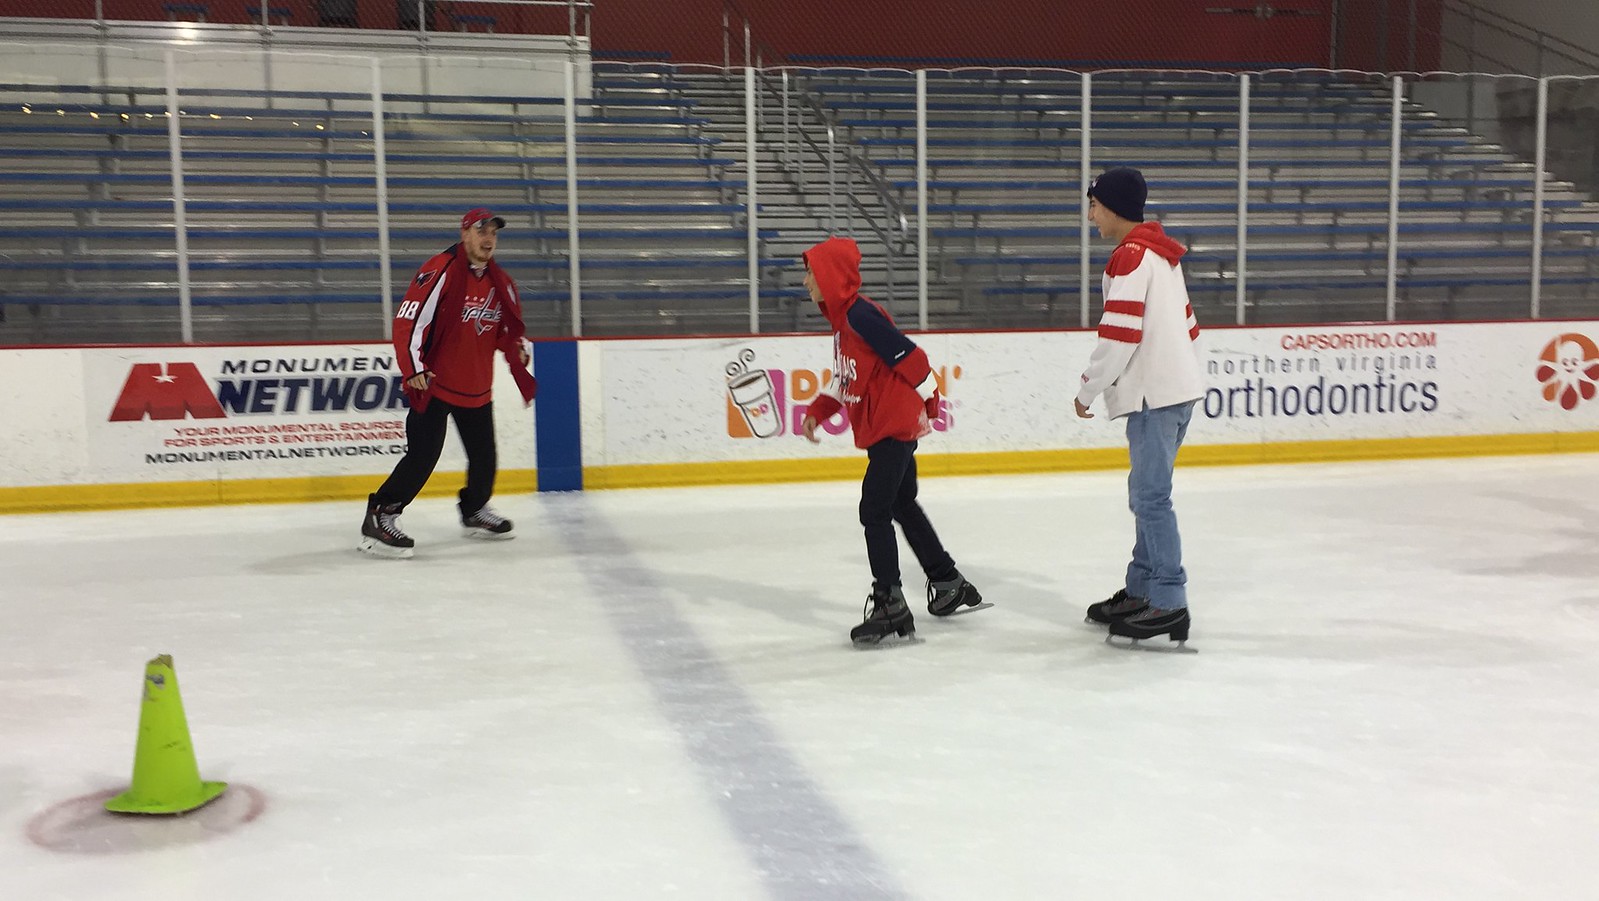 2016_T4T_Skate with Washington Capitals 6